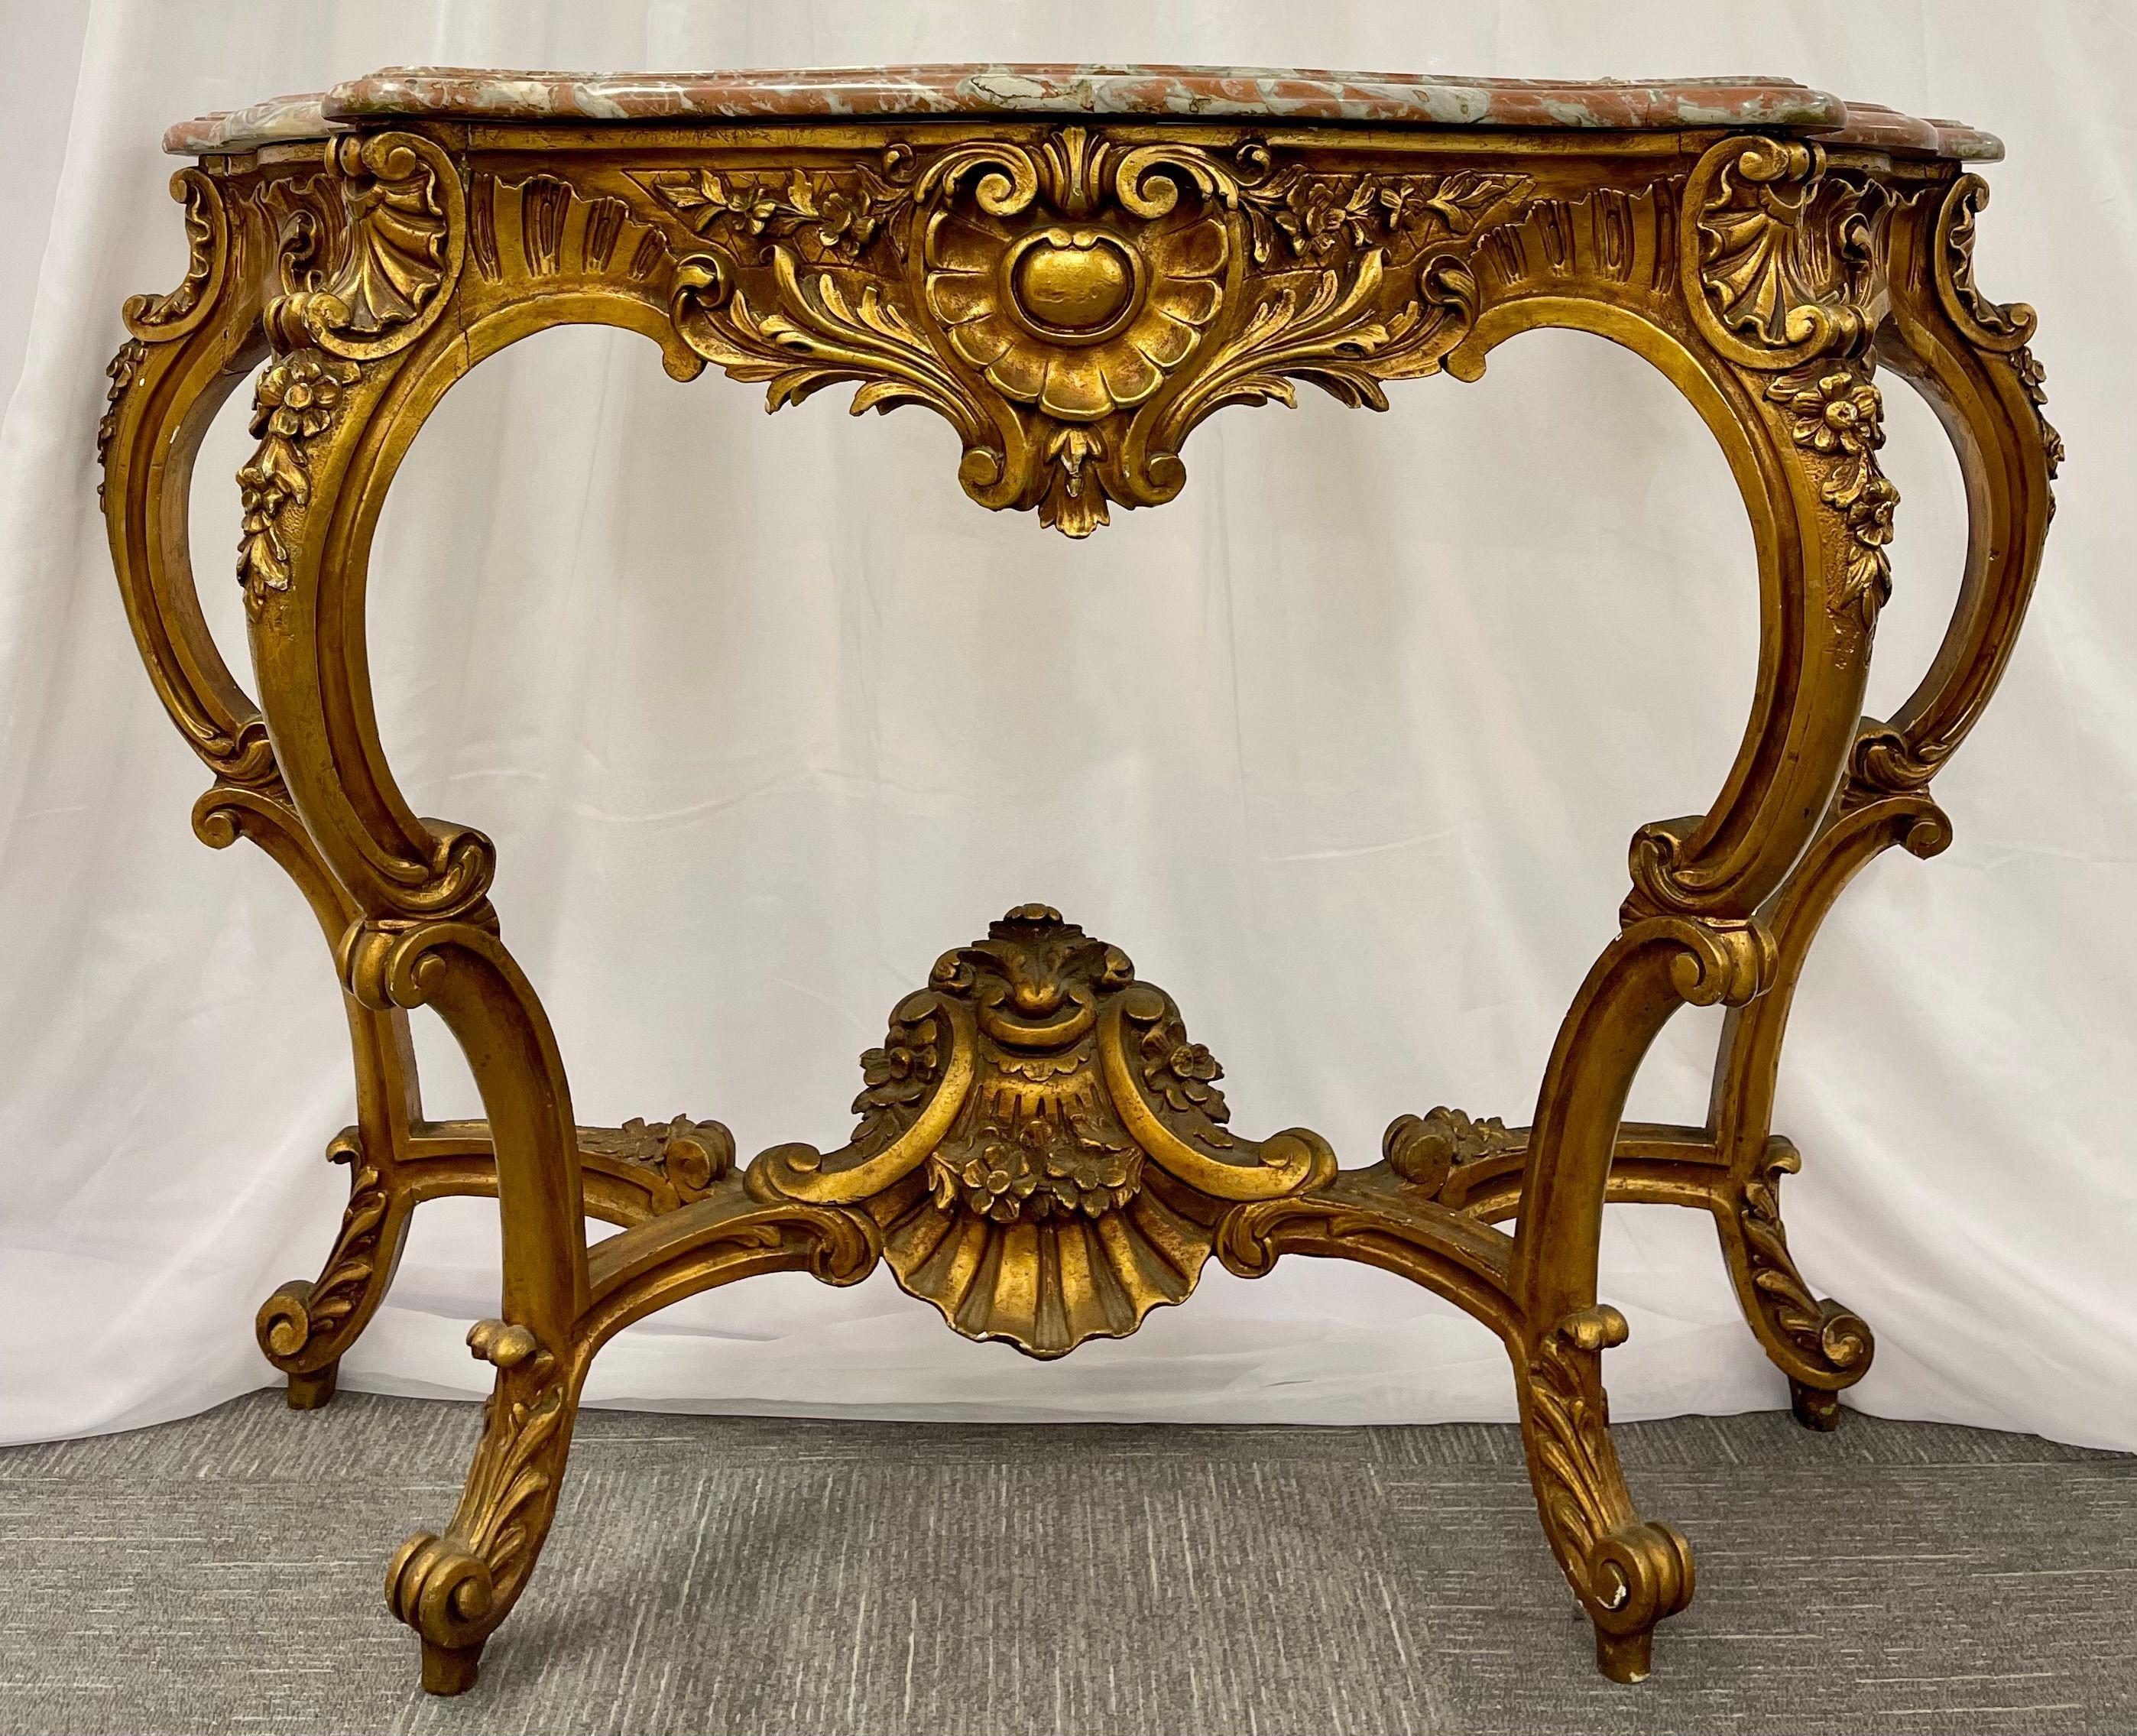 Marble-Top Louis XV Style Console Table by Jansen Exquisite Carved Details 1920s For Sale 12